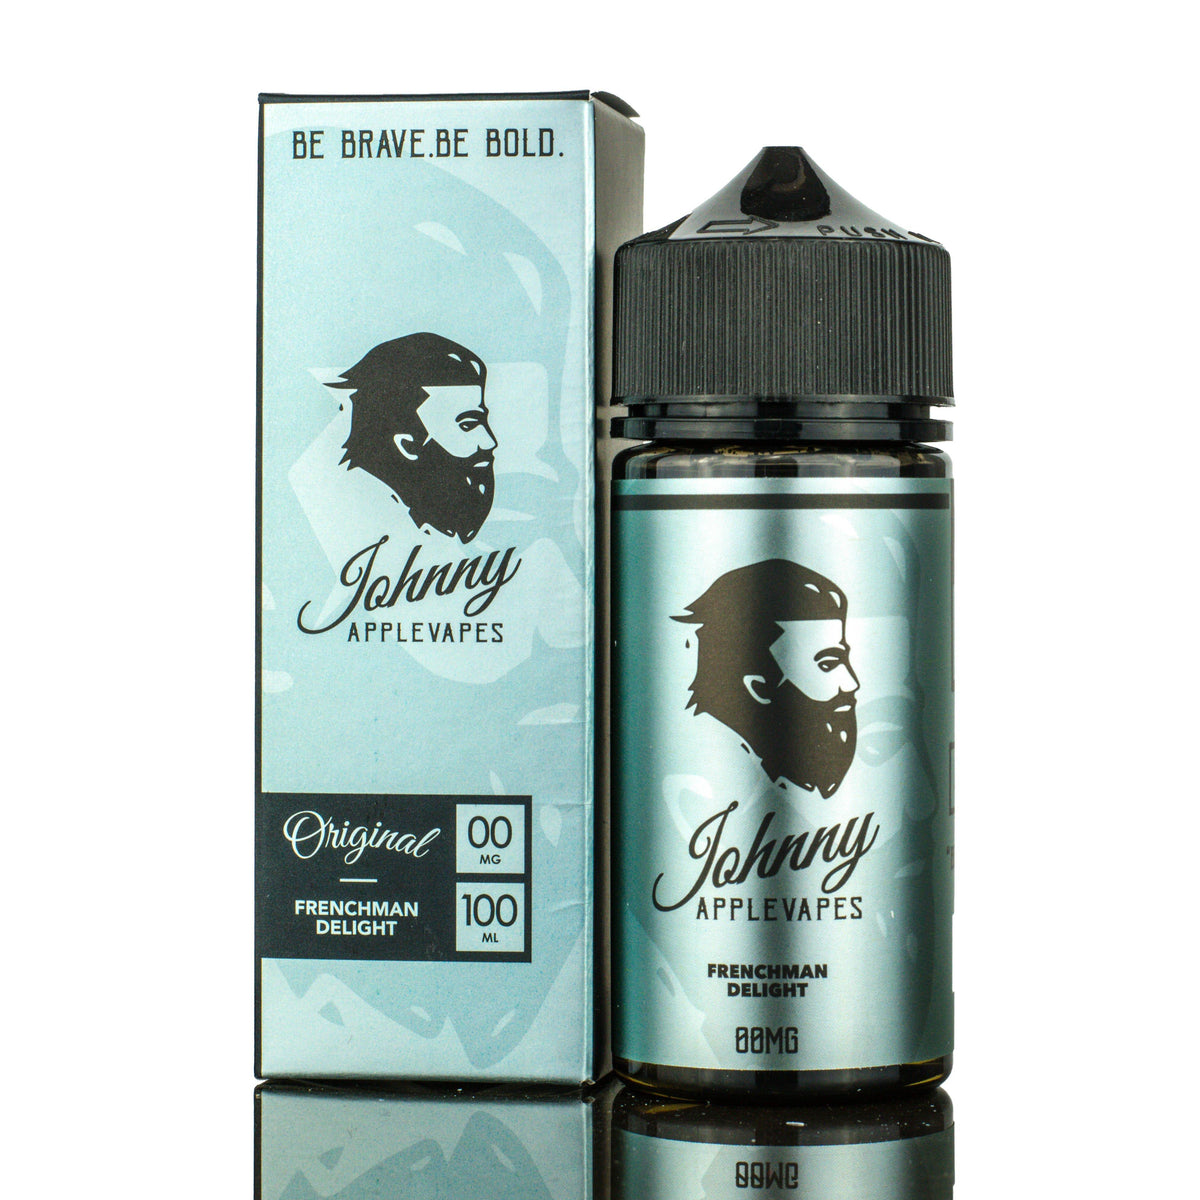 Frenchman Delight by Johnny Applevapes 100ml with Packaging